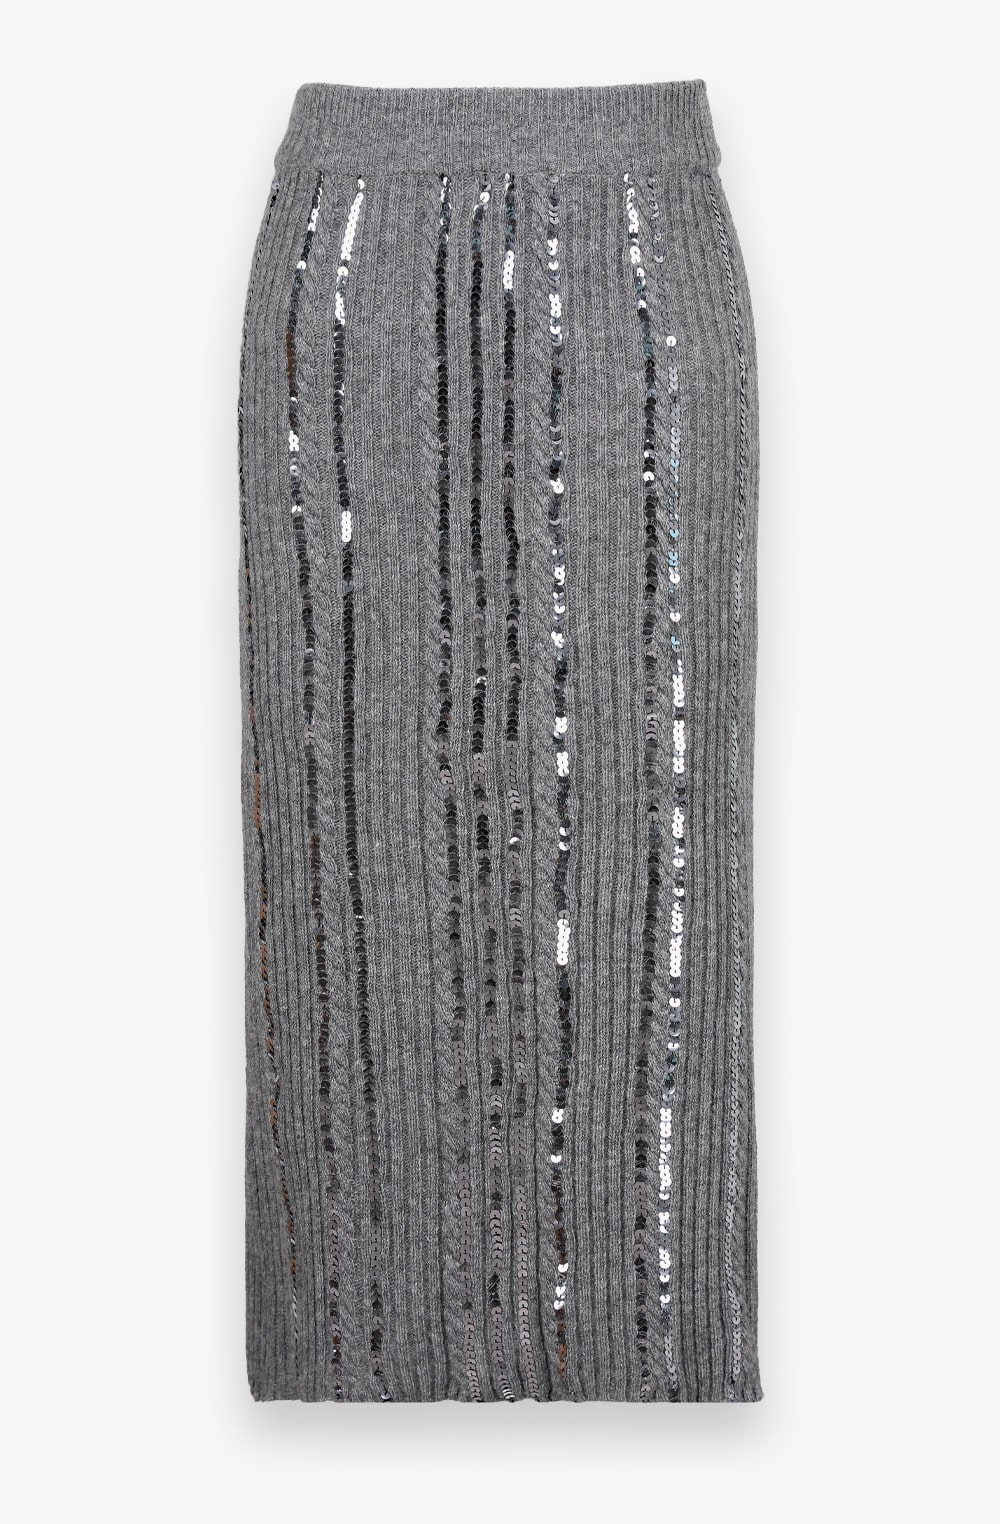 HIGH QUALITY LINE - Wool Cash Sequin Embellished Knit Skirt (GRAY) 2차 예약 오더